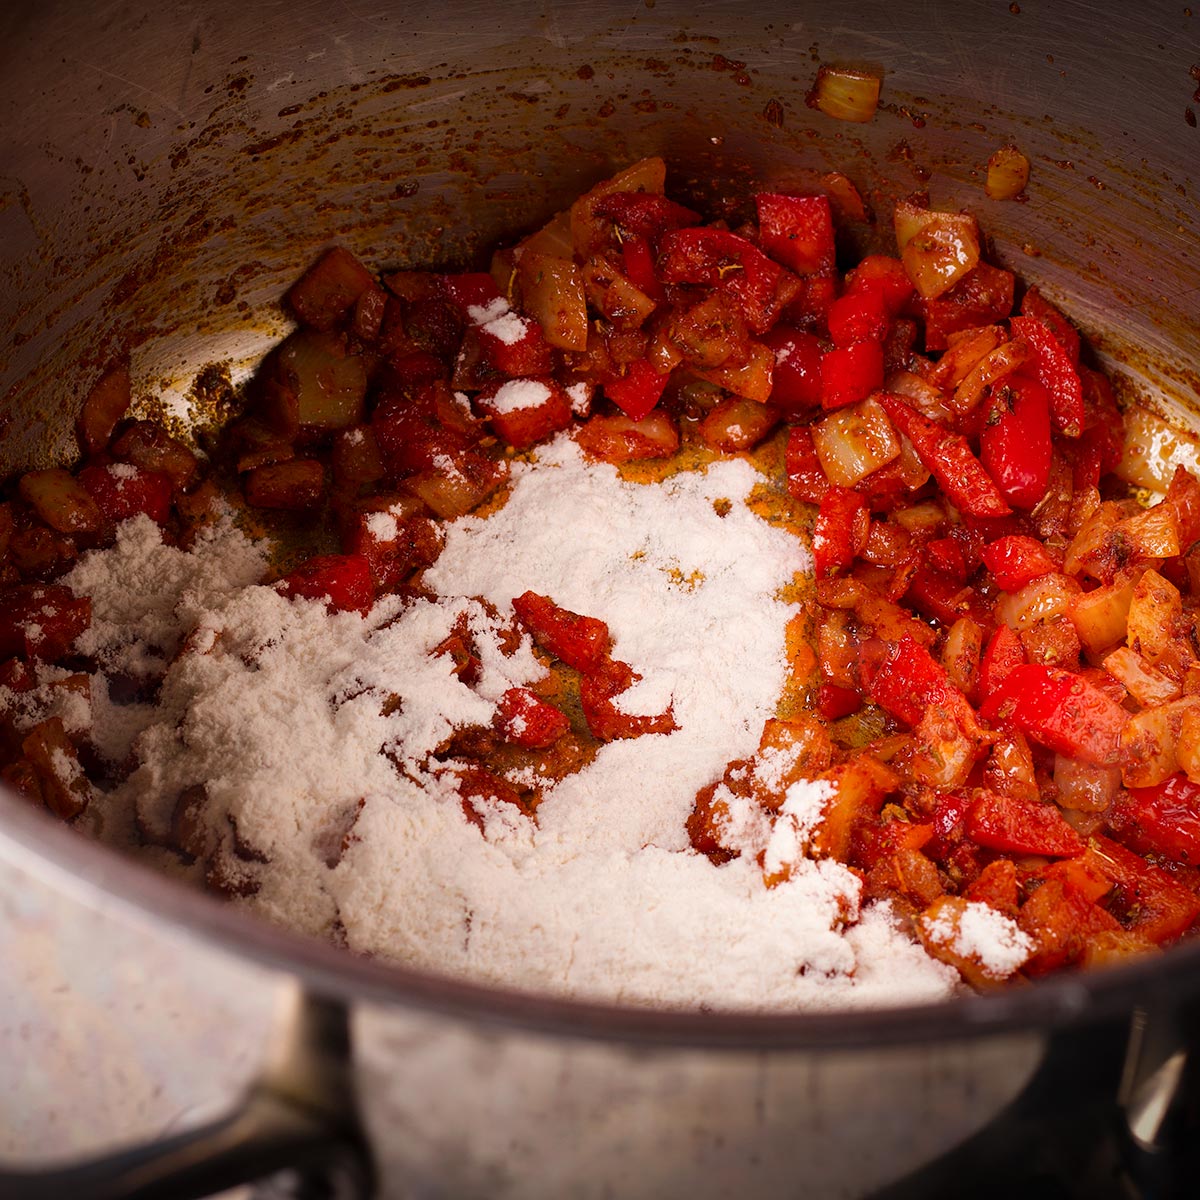 Add some flour to the vegetables and spices in the saucepan and stir to coat everything in the flour.